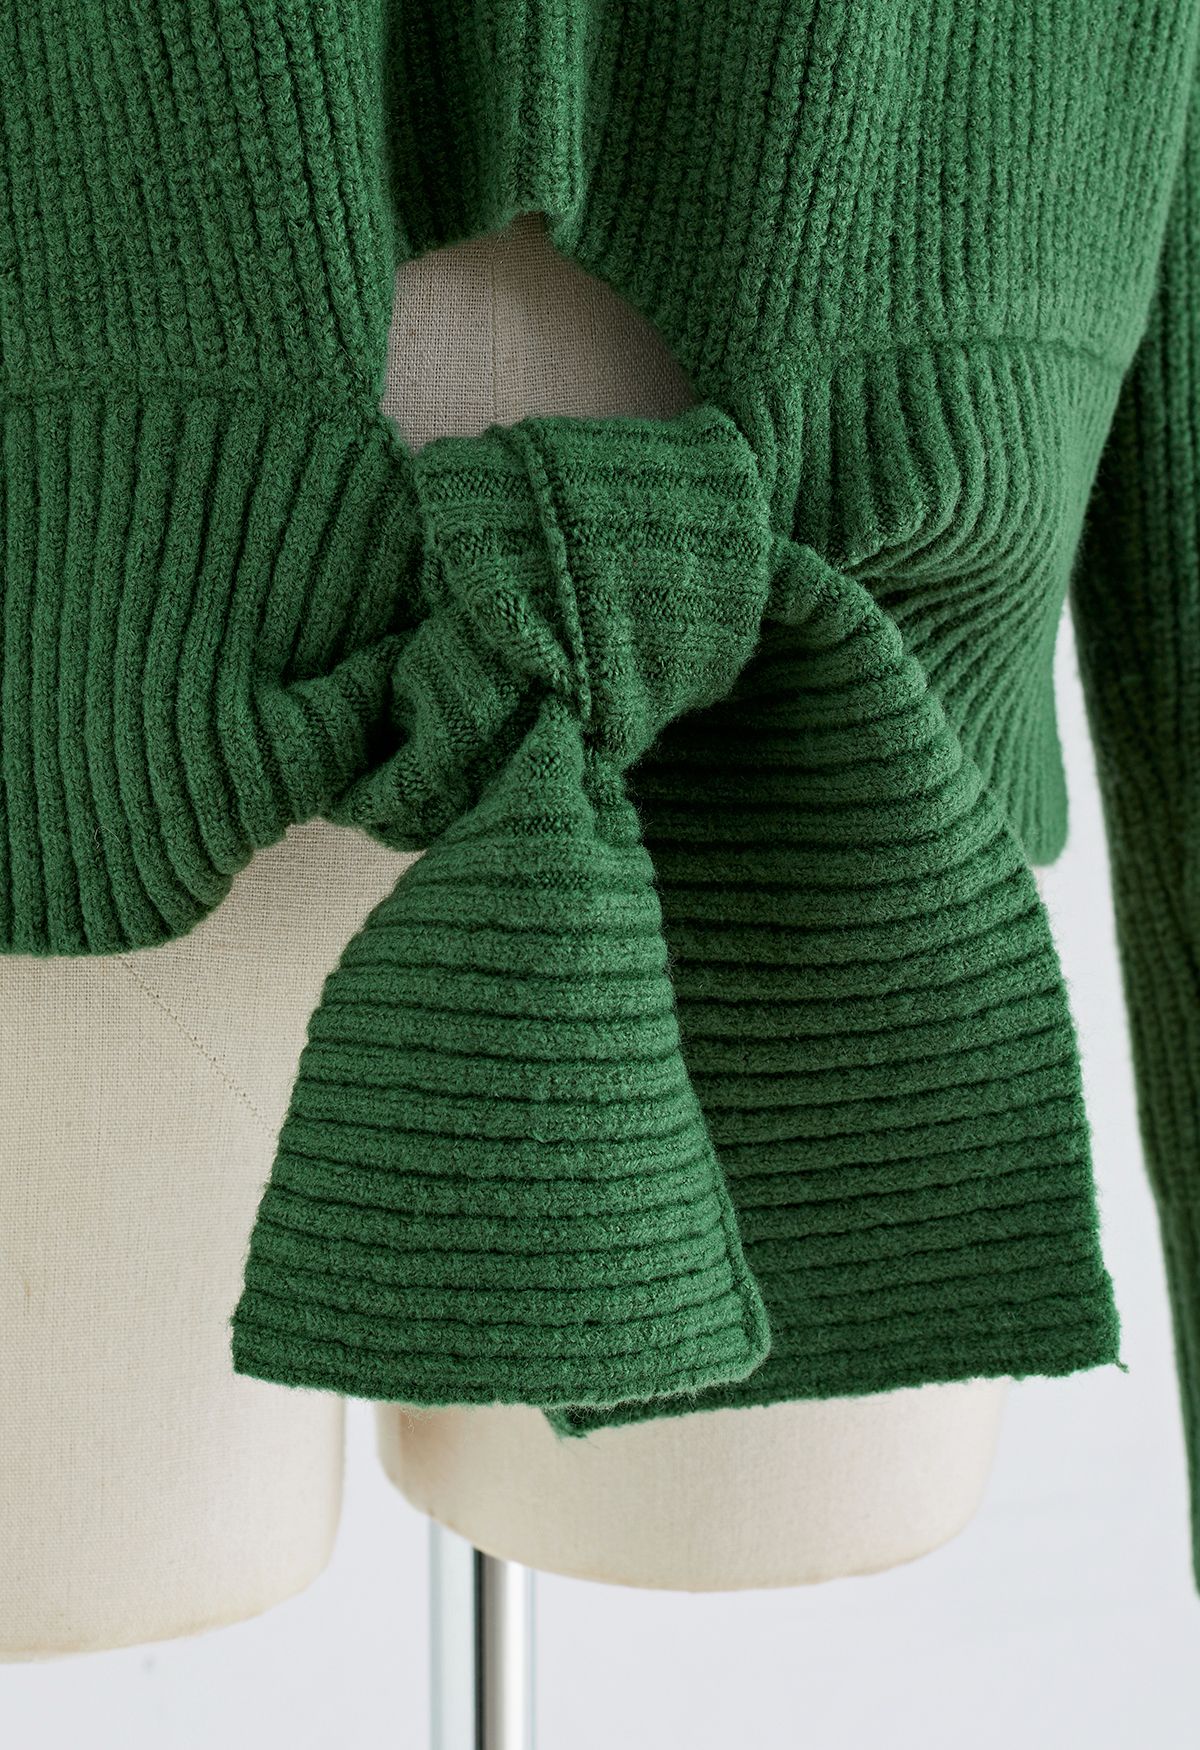 Self-Tie Knot Round Neck Knit Sweater in Green